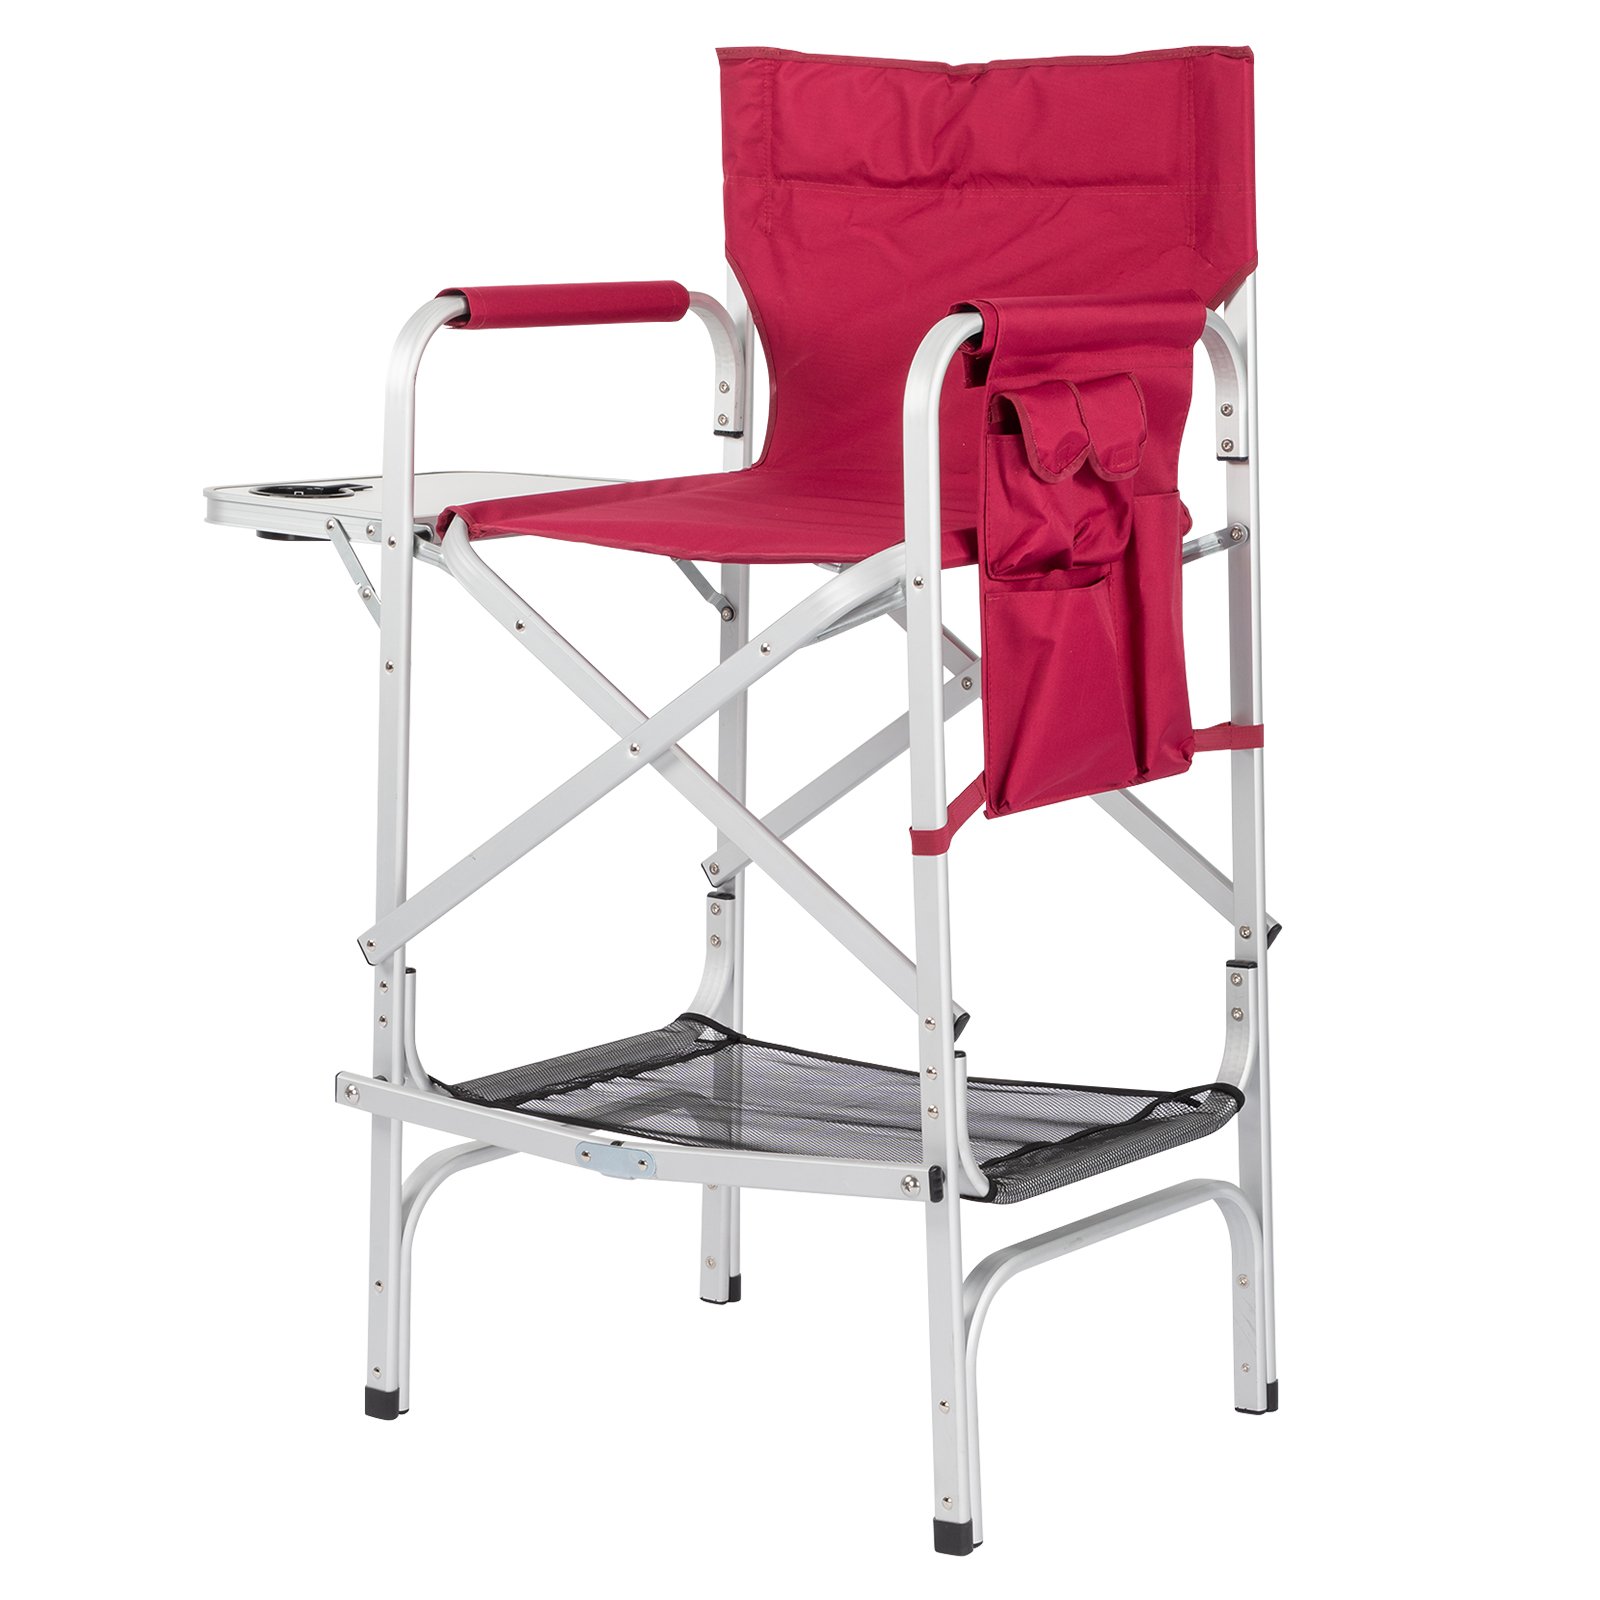 GoDecor Director Chair Oversize Padded Seat Camping Chair with Side Table Red - image 2 of 7